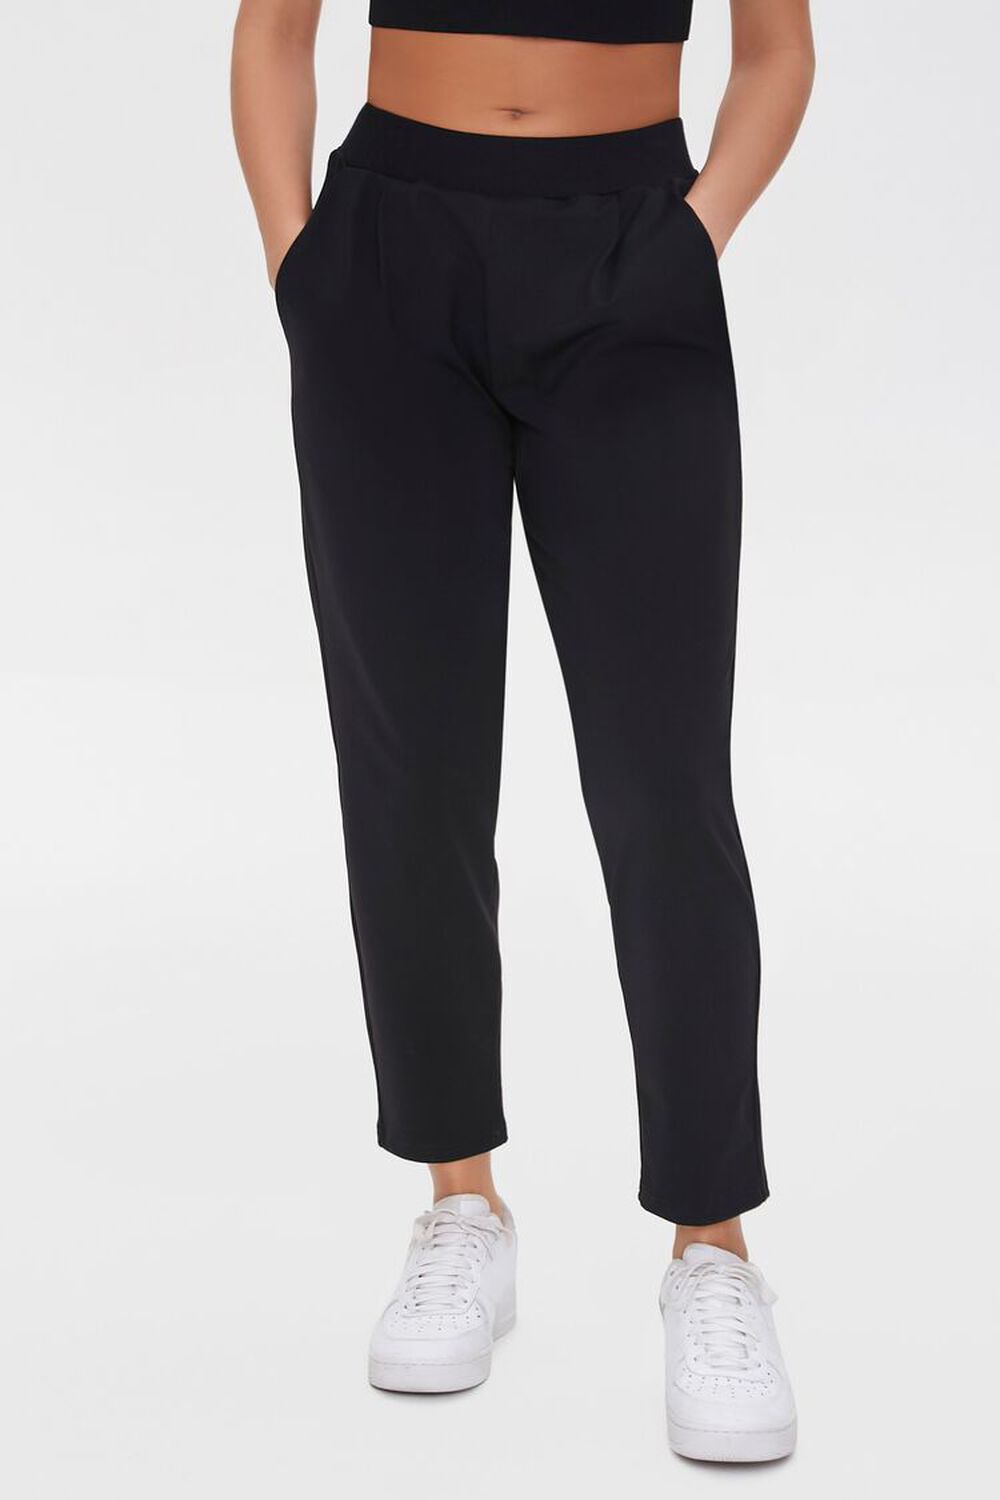 BLACK Active Tapered Ankle Pants, image 2